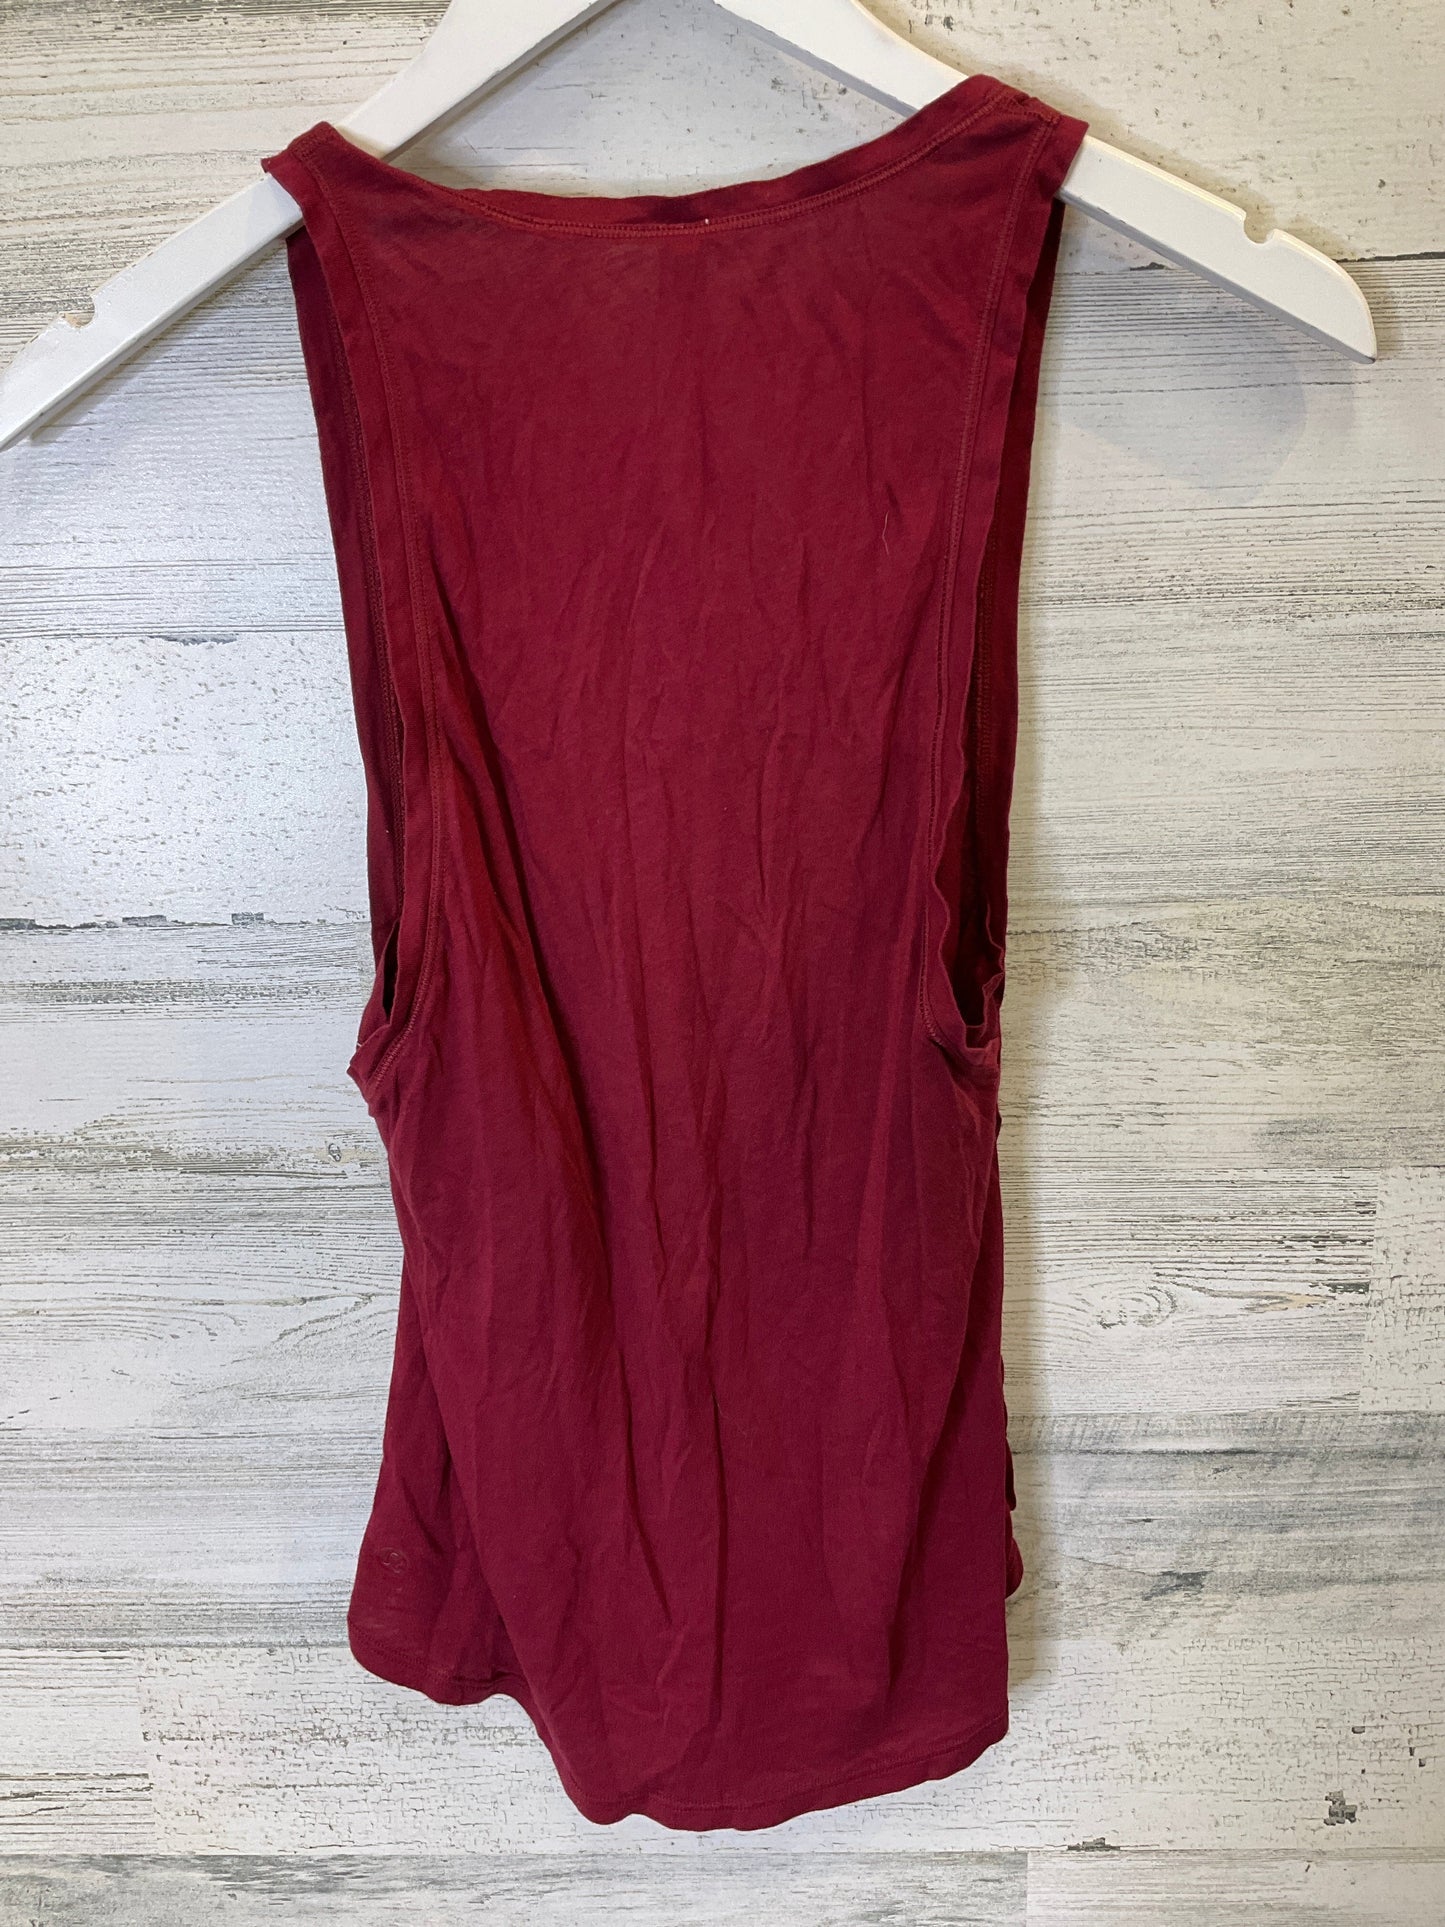 Red Athletic Tank Top Lululemon, Size 2